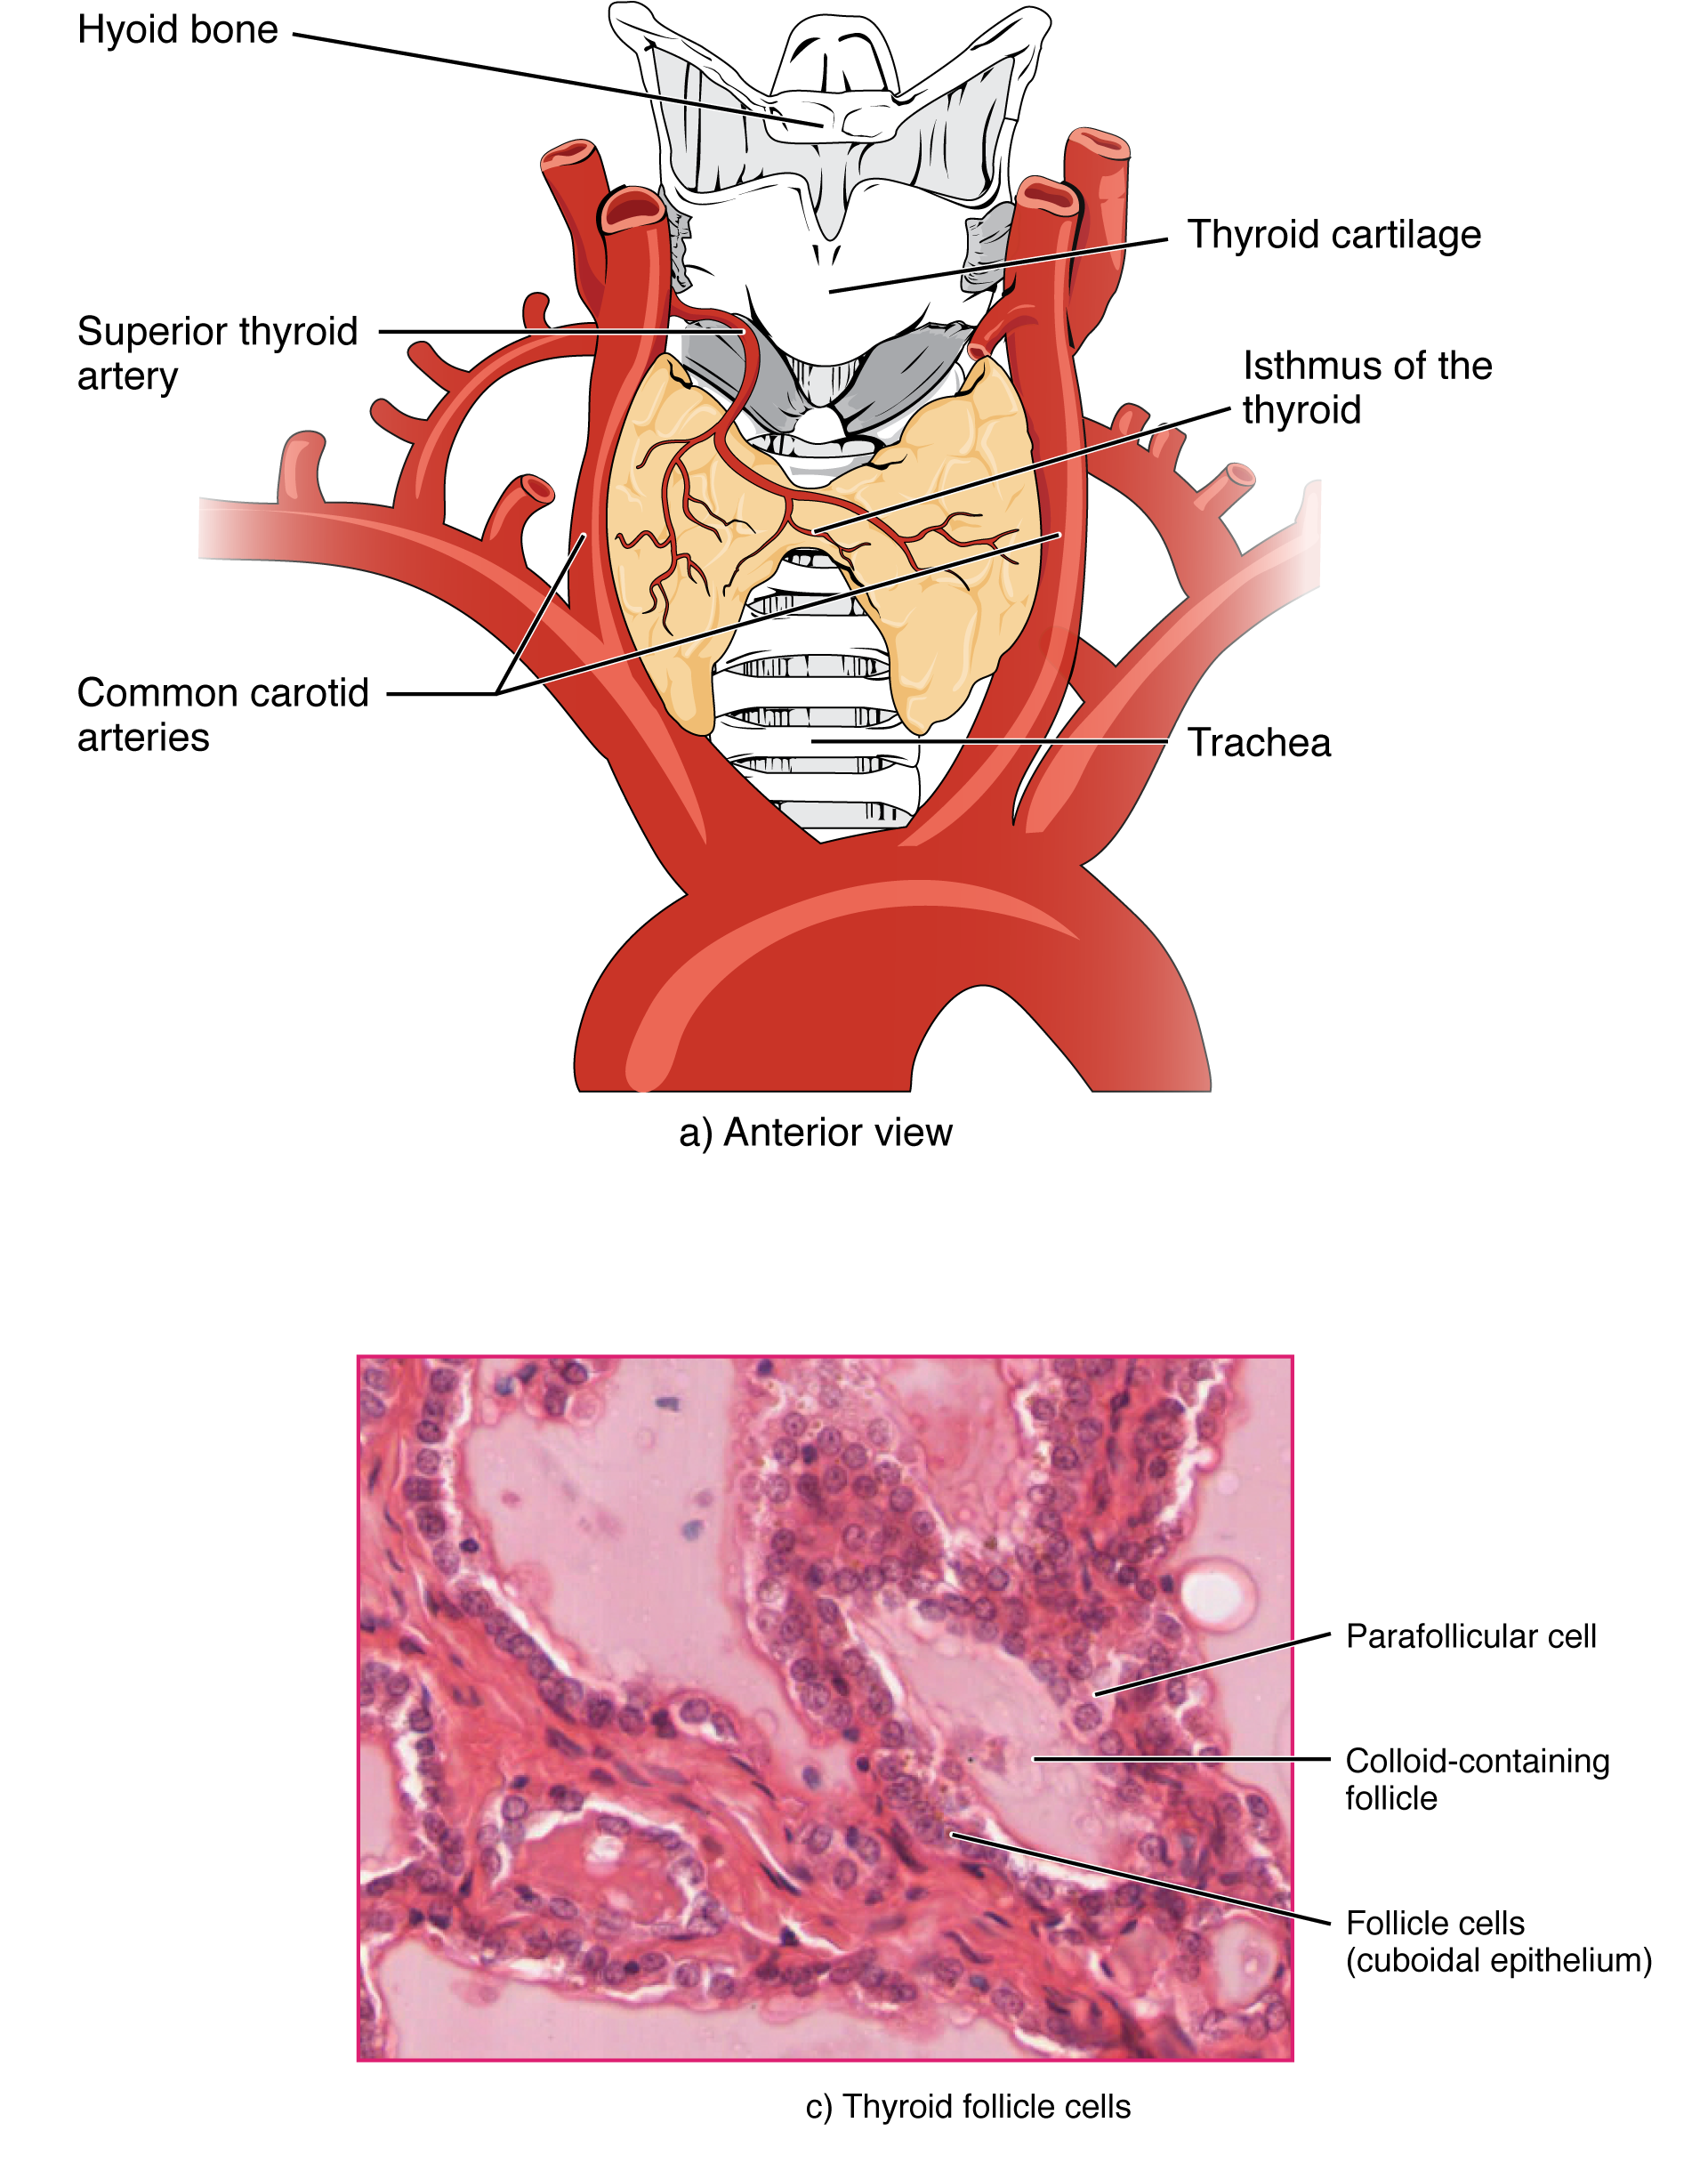 Part A of this figure is a diagram of the anterior view of the thyroid gland. The thyroid gland is a butterfly-shaped gland wrapping around the trachea. It narrows at its center, just under the thyroid cartilage of the larynx. This narrow area is called the isthmus of the thyroid. Two large arteries, the common carotid arteries, run parallel to the trachea on the outer border of the thyroid. A small artery enters the superior edge of the thyroid, near the isthmus, and branches throughout the two “wings” of the thyroid. Part B of this figure is a posterior view of the thyroid. The posterior view shows that the thyroid does not completely wrap around the posterior of the trachea. The posterior sides of the thyroid wings can be seen protruding from under the cricoid cartilage of the larynx. The posterior sides of the thyroid “wings” each contain two small, disc-shaped parathyroid glands embedded in the thyroid tissue. Within each wing, one disc is located superior to the other. These are labeled the left and right parathyroid glands. Just under the inferior parathyroid glands are two arteries that bring blood to the thyroid from the left and right subclavian arteries. Part C of this figure is a micrograph of thyroid tissue. The thyroid follicle cells are cuboidal epithelial cells. These cells form a ring around irregular-shaped cavities called follicles. The follicles contain light colored colloid. A larger parafollicular cell is embedded between two of the follicular cells near the edge of a follicle.